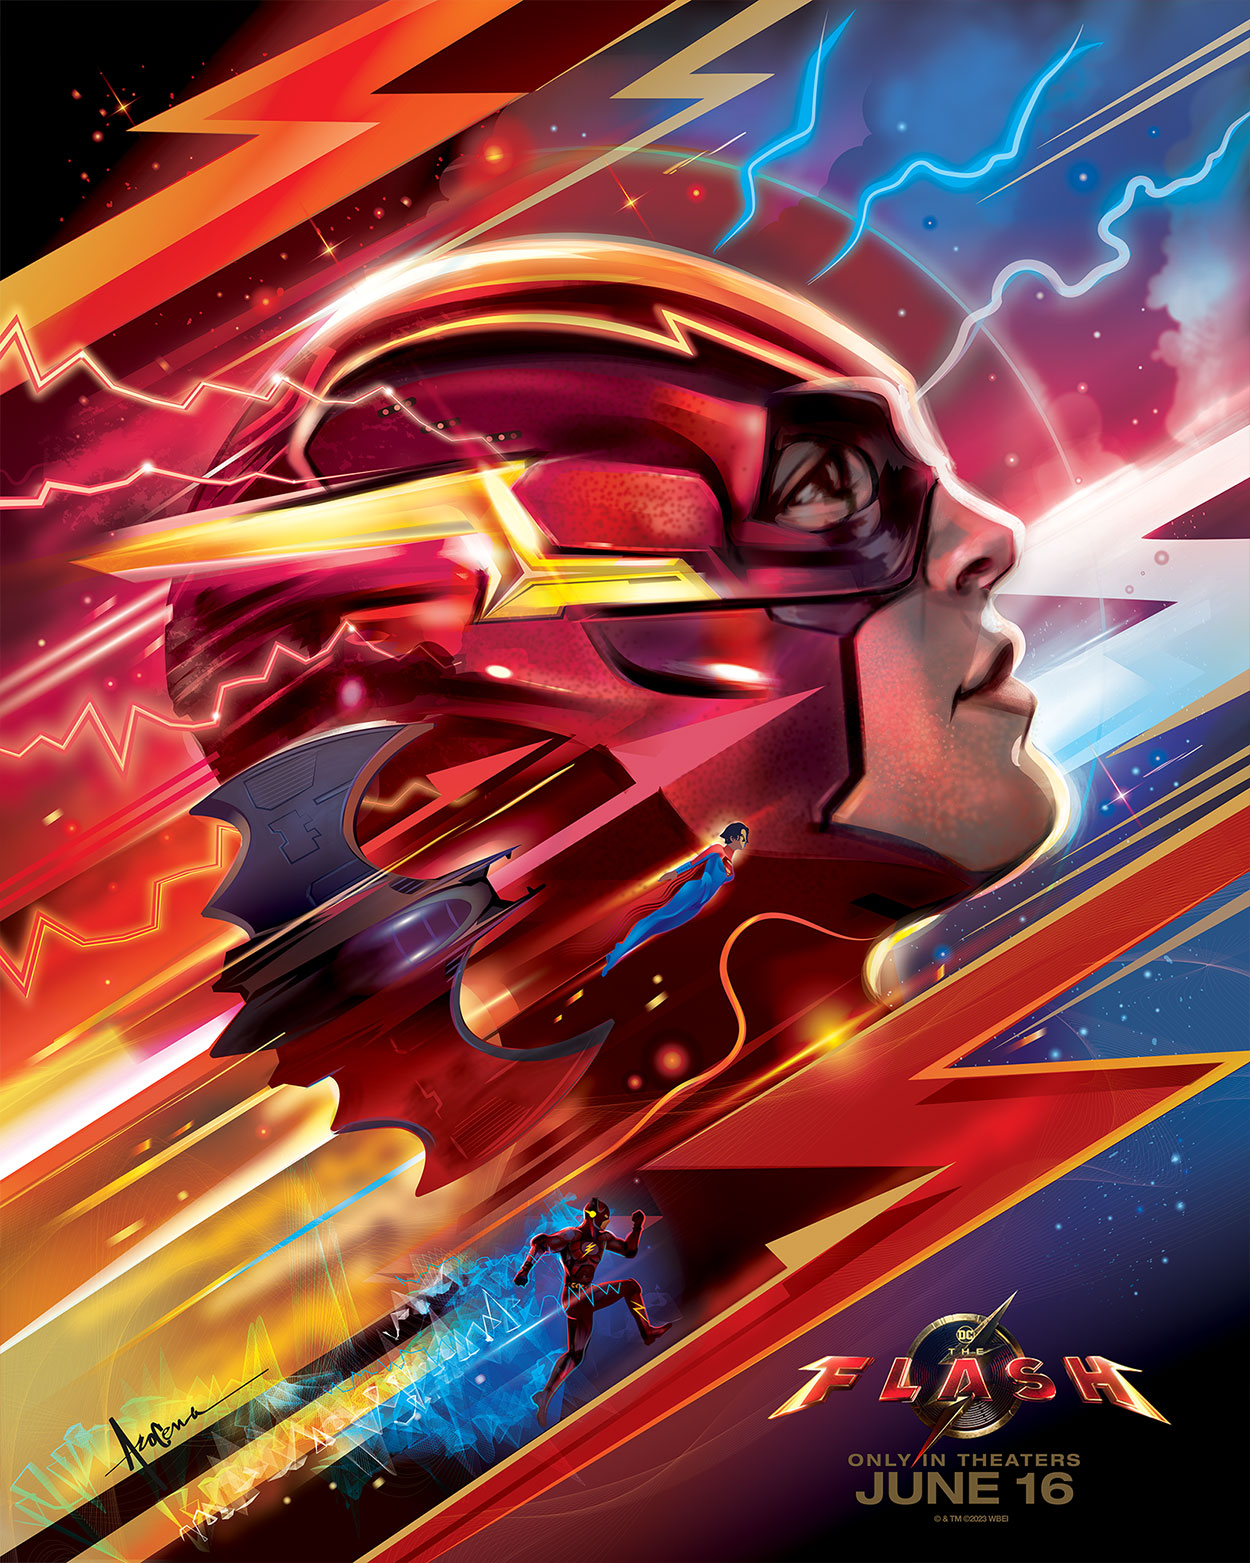 Artwork by Warner Bros Pictures – The Flash